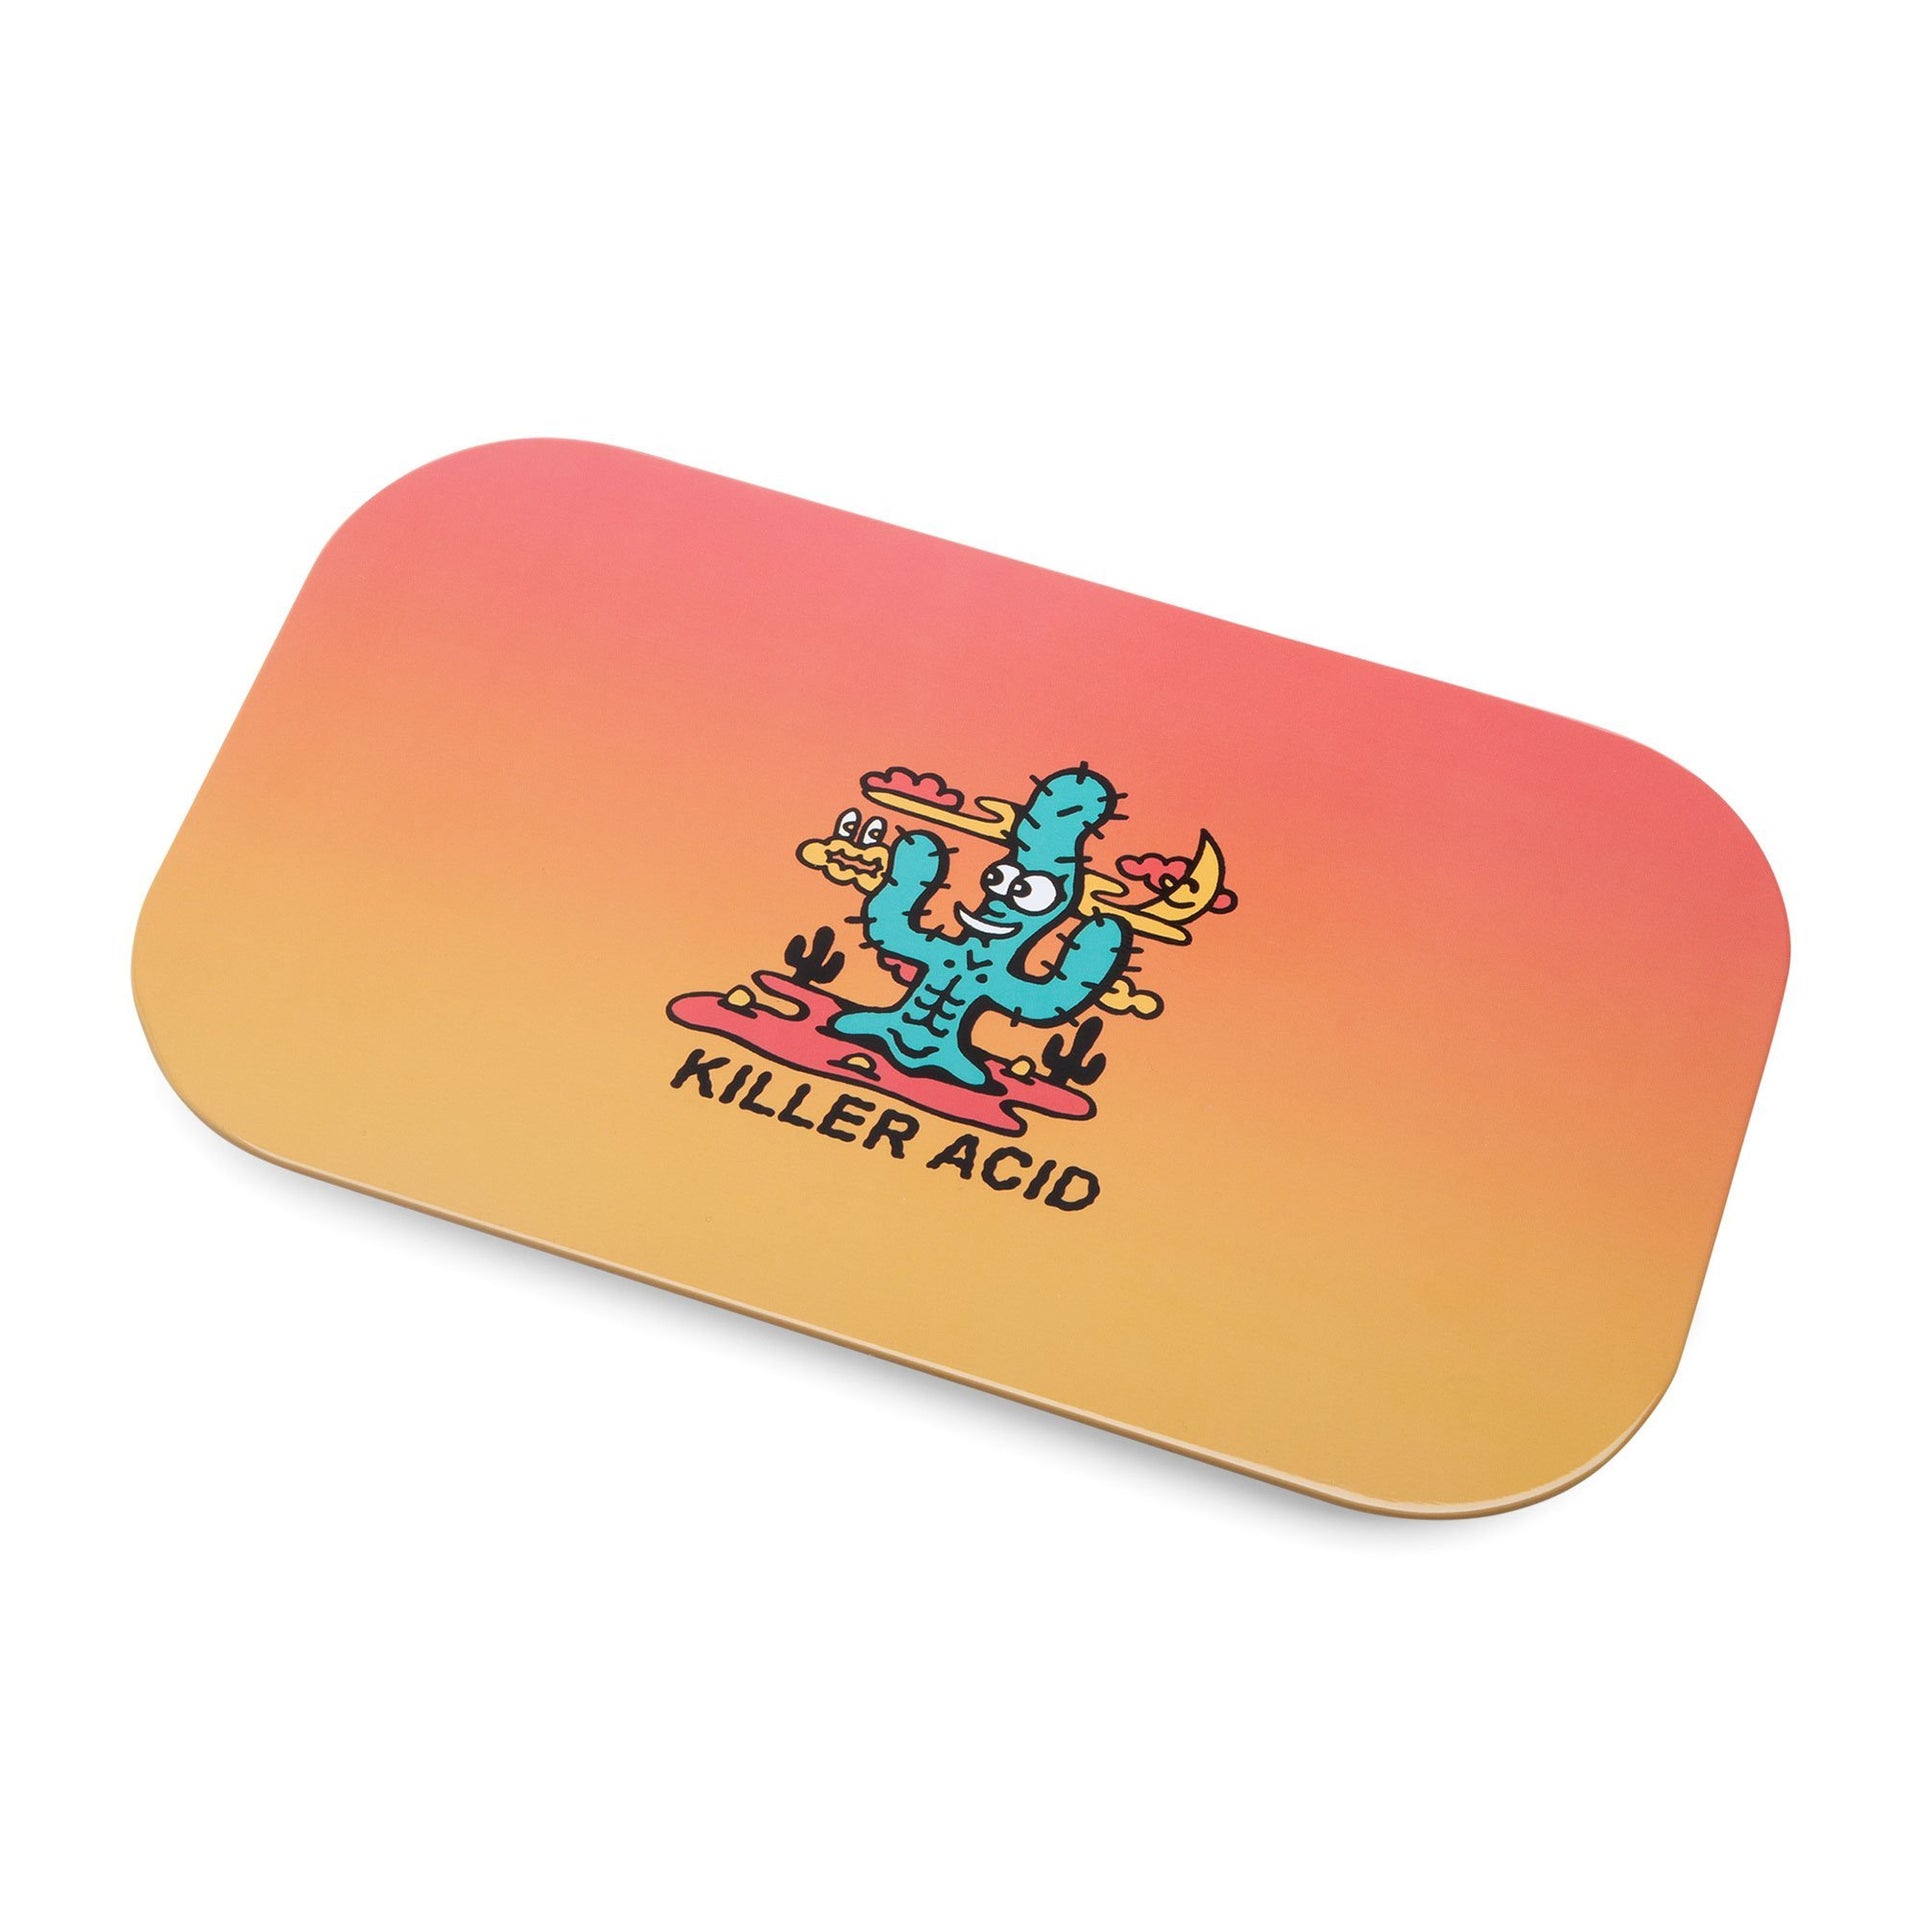 420 Science x Killer Acid Magnetic Lid Rolling Tray - Road Trip | Rolling Trays | 420 Science